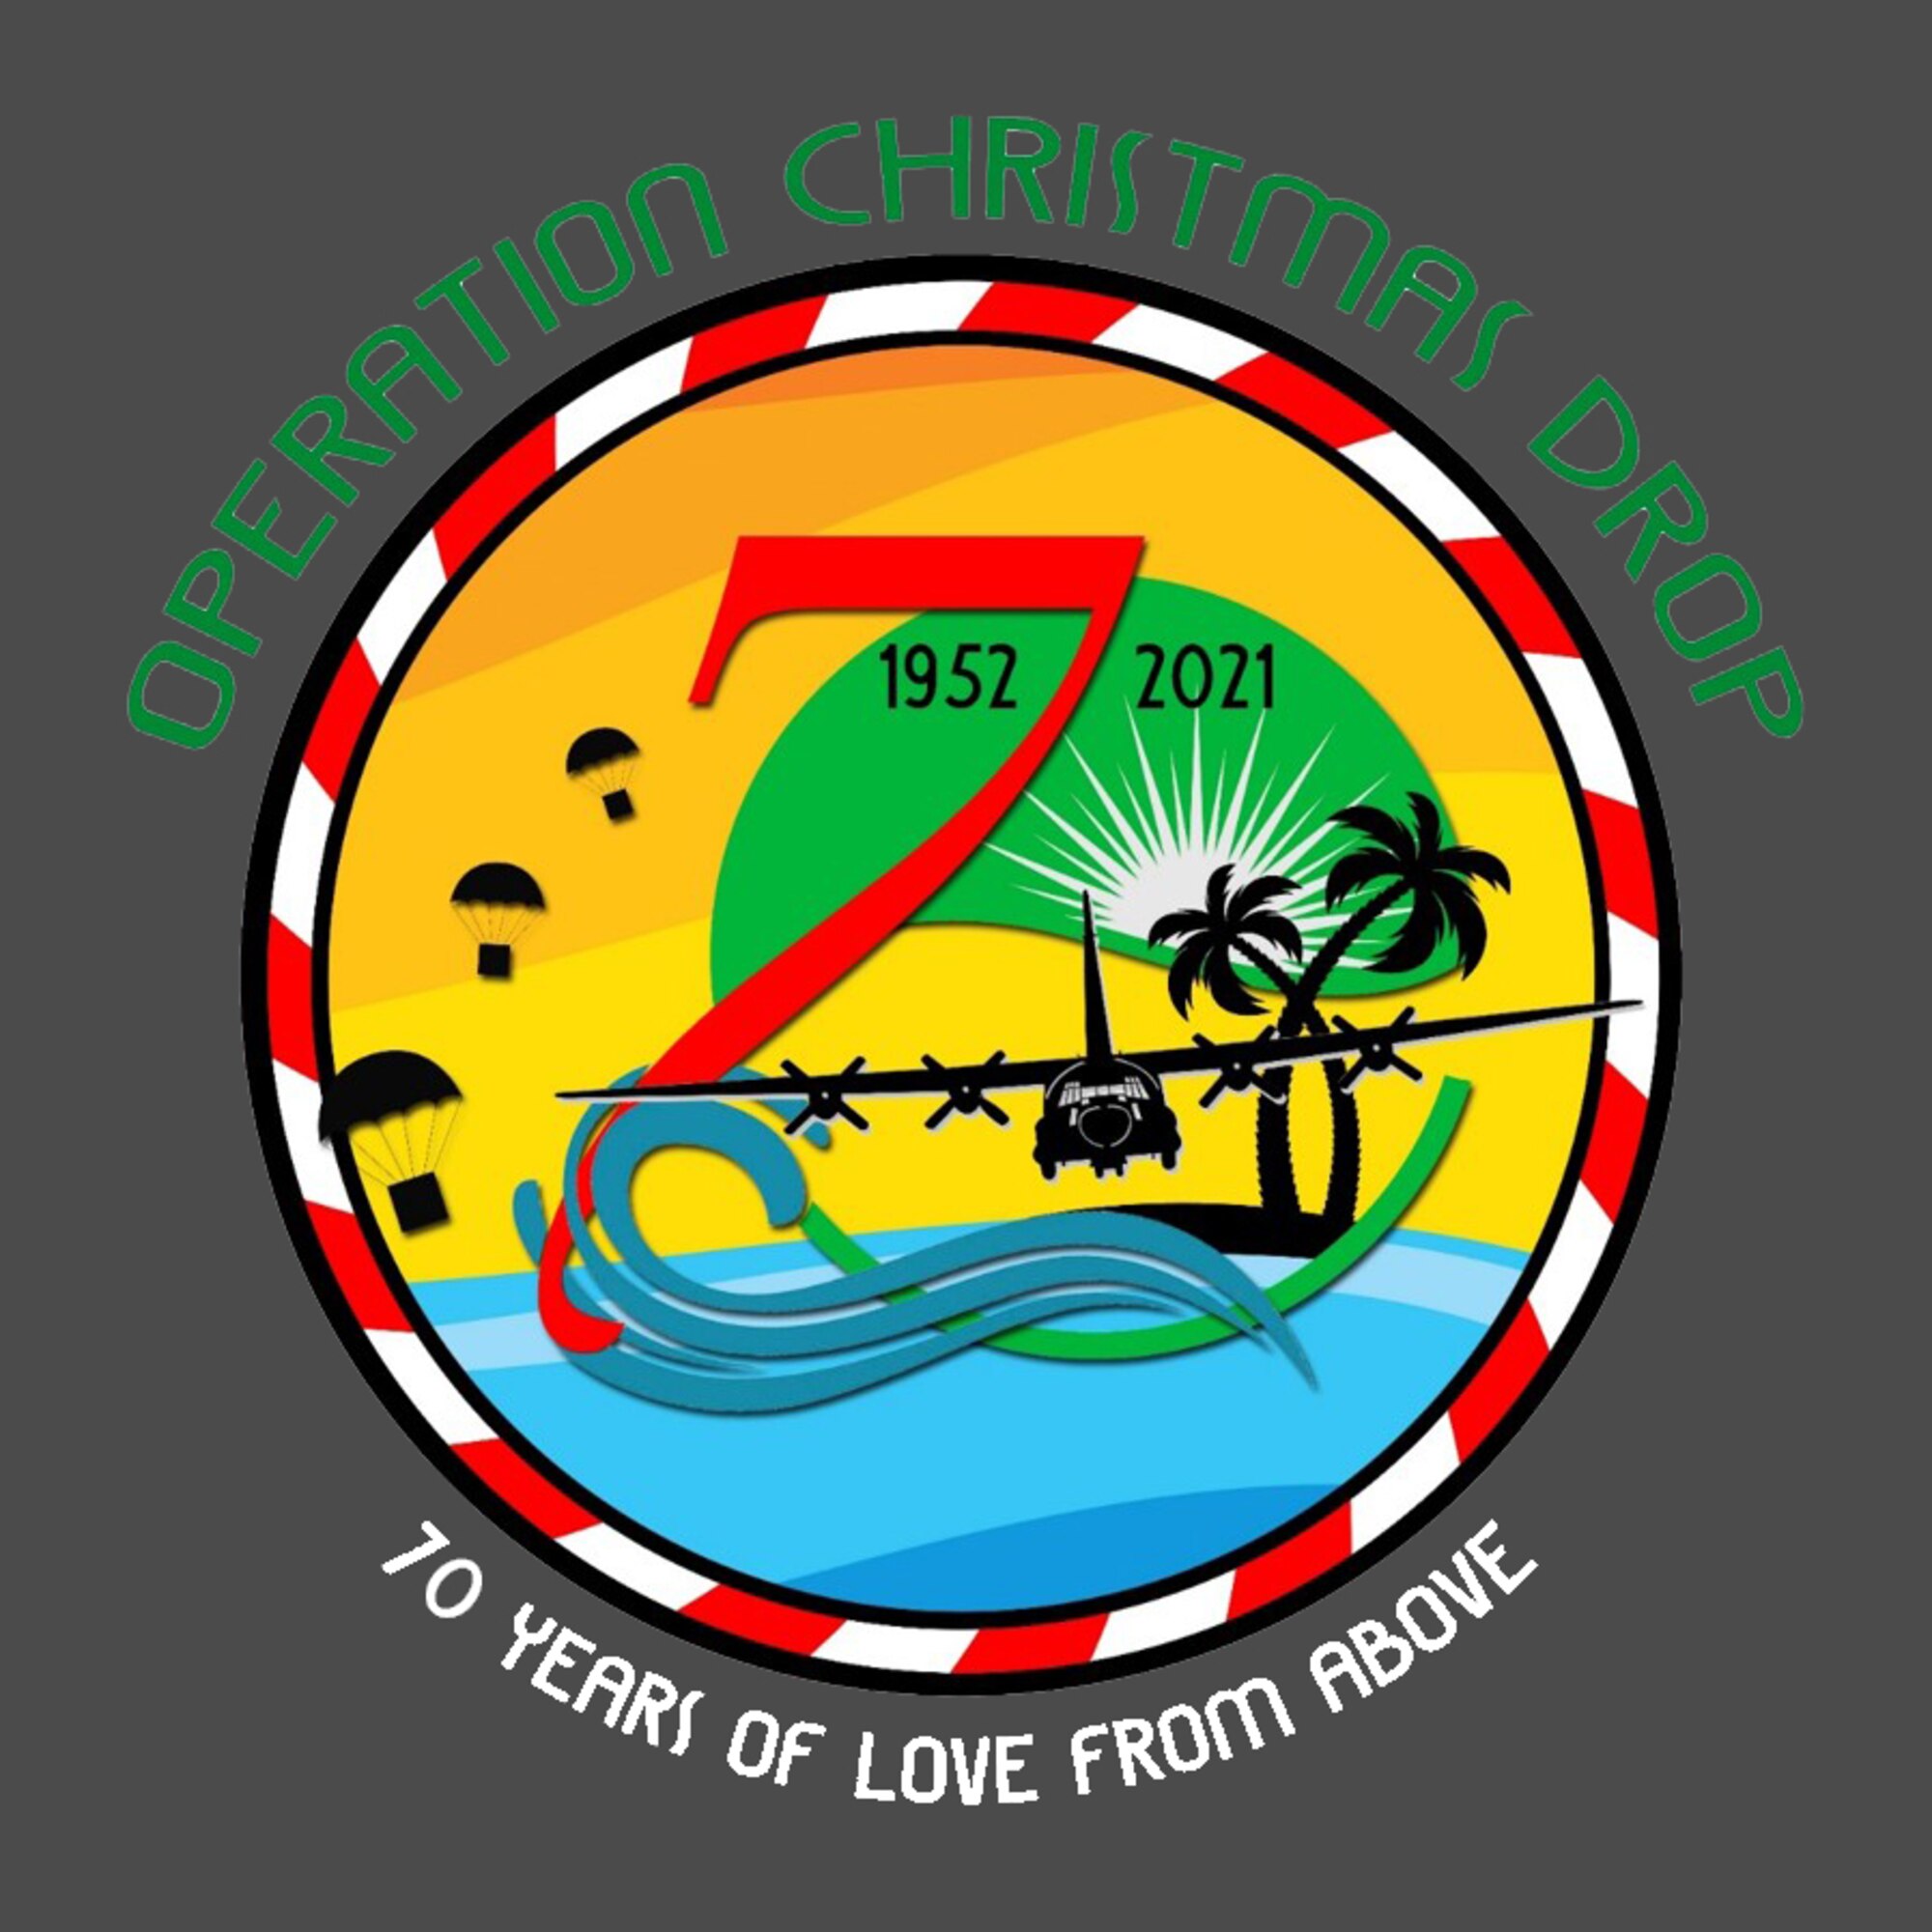 Graphic image of the 2021 Operation Christmas Drop patch